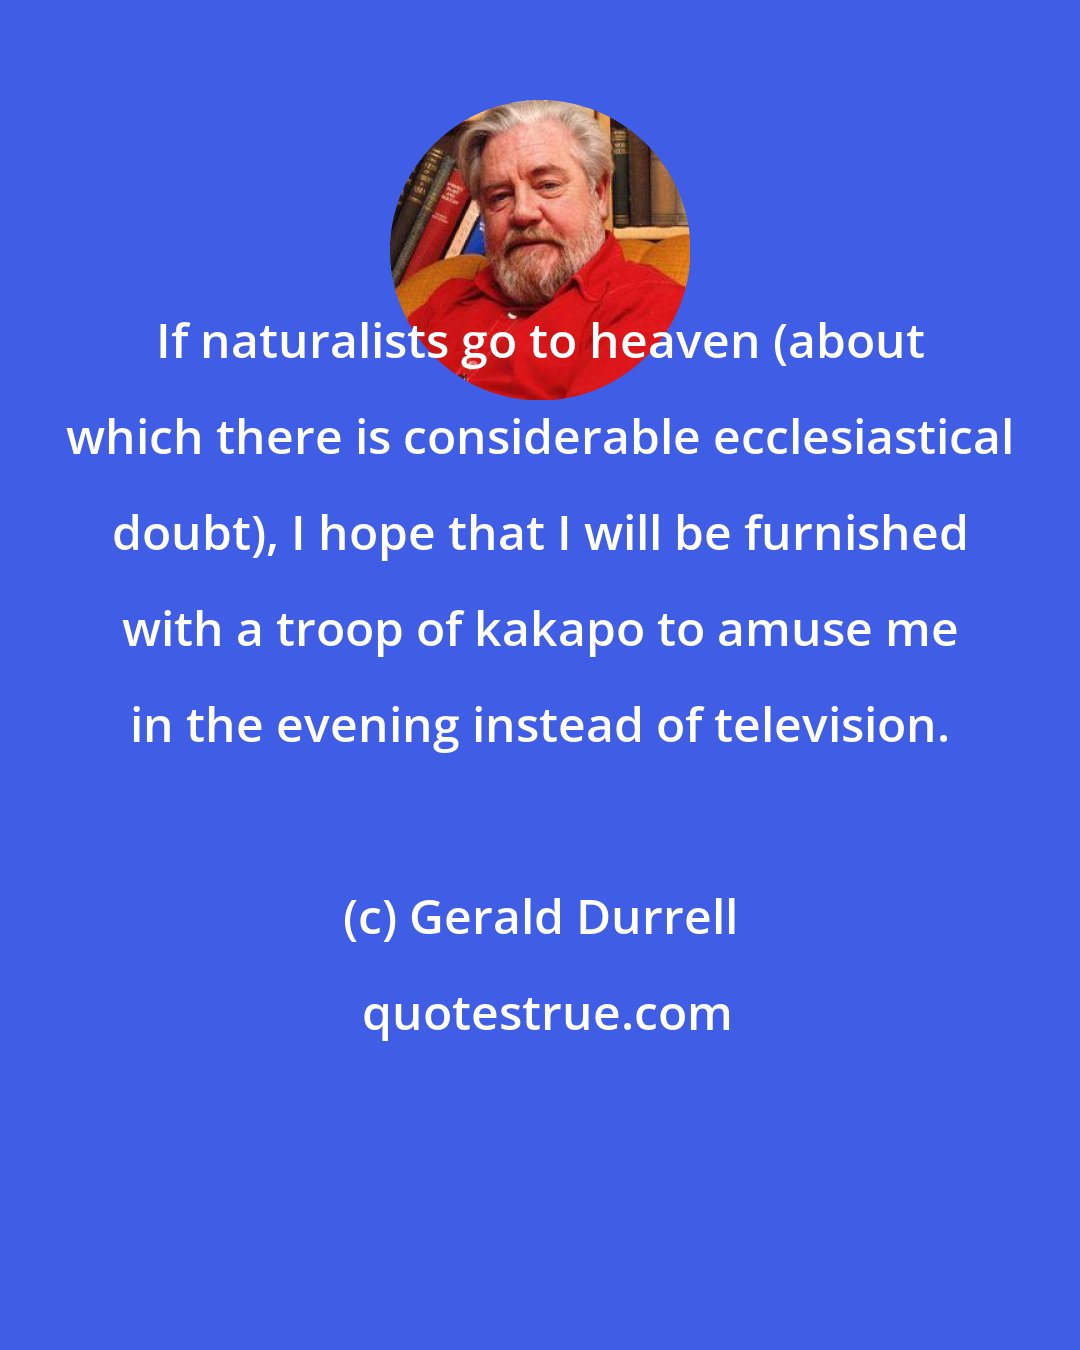 Gerald Durrell: If naturalists go to heaven (about which there is considerable ecclesiastical doubt), I hope that I will be furnished with a troop of kakapo to amuse me in the evening instead of television.